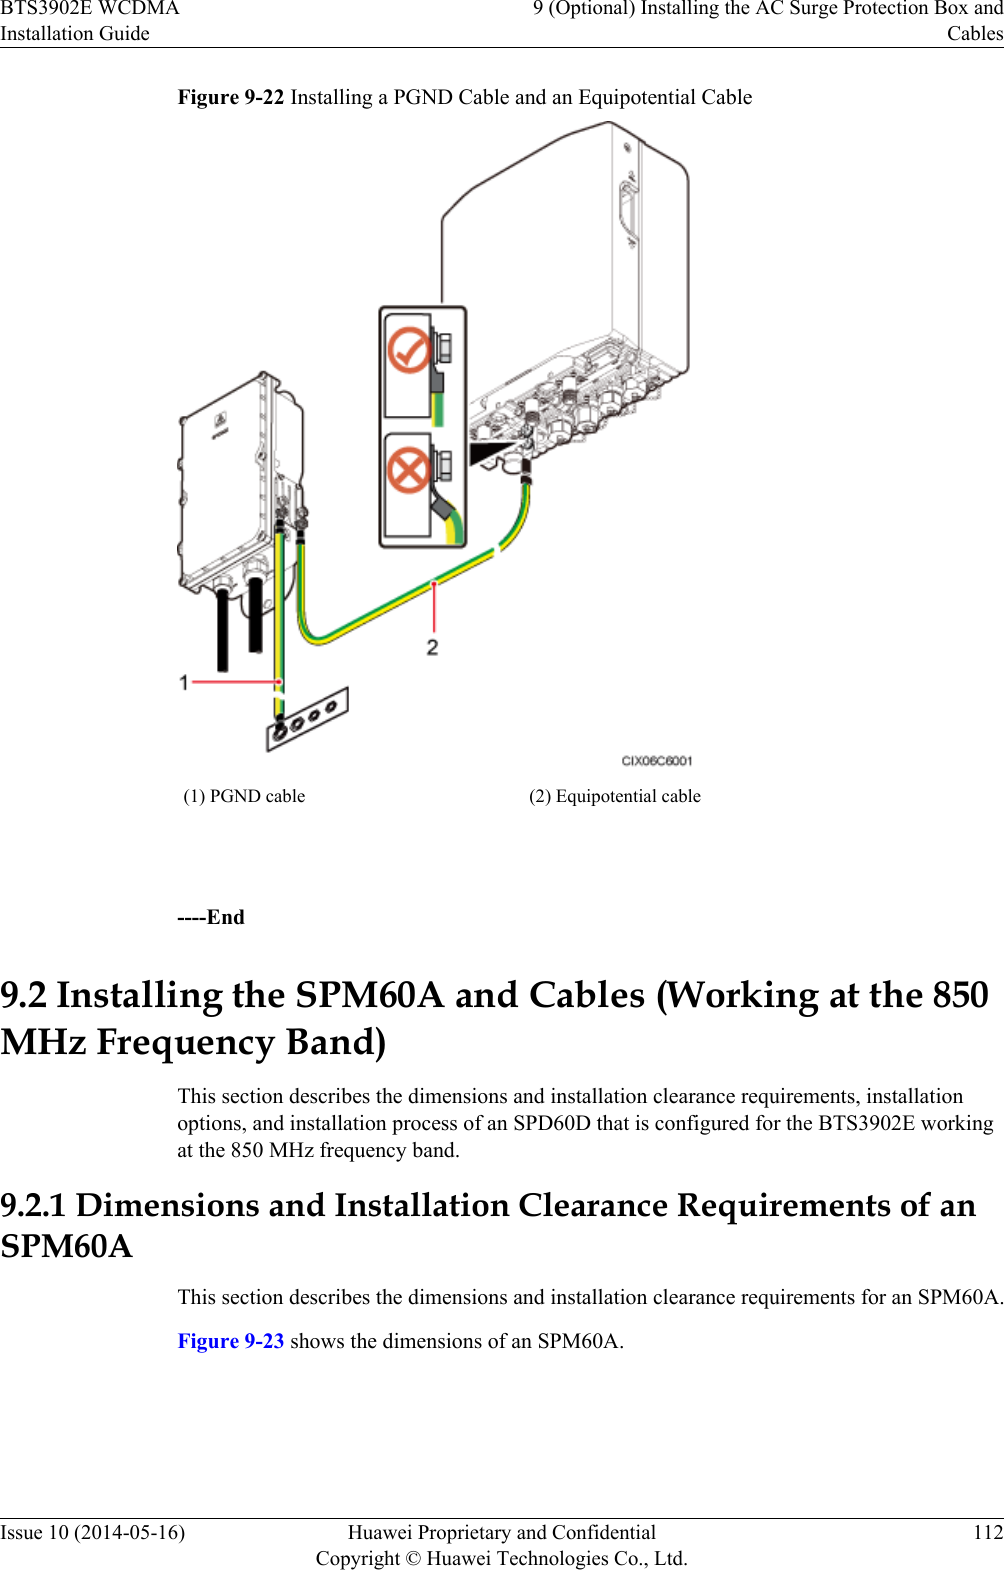 Figure 9-22 Installing a PGND Cable and an Equipotential Cable(1) PGND cable (2) Equipotential cable ----End9.2 Installing the SPM60A and Cables (Working at the 850MHz Frequency Band)This section describes the dimensions and installation clearance requirements, installationoptions, and installation process of an SPD60D that is configured for the BTS3902E workingat the 850 MHz frequency band.9.2.1 Dimensions and Installation Clearance Requirements of anSPM60AThis section describes the dimensions and installation clearance requirements for an SPM60A.Figure 9-23 shows the dimensions of an SPM60A.BTS3902E WCDMAInstallation Guide9 (Optional) Installing the AC Surge Protection Box andCablesIssue 10 (2014-05-16) Huawei Proprietary and ConfidentialCopyright © Huawei Technologies Co., Ltd.112